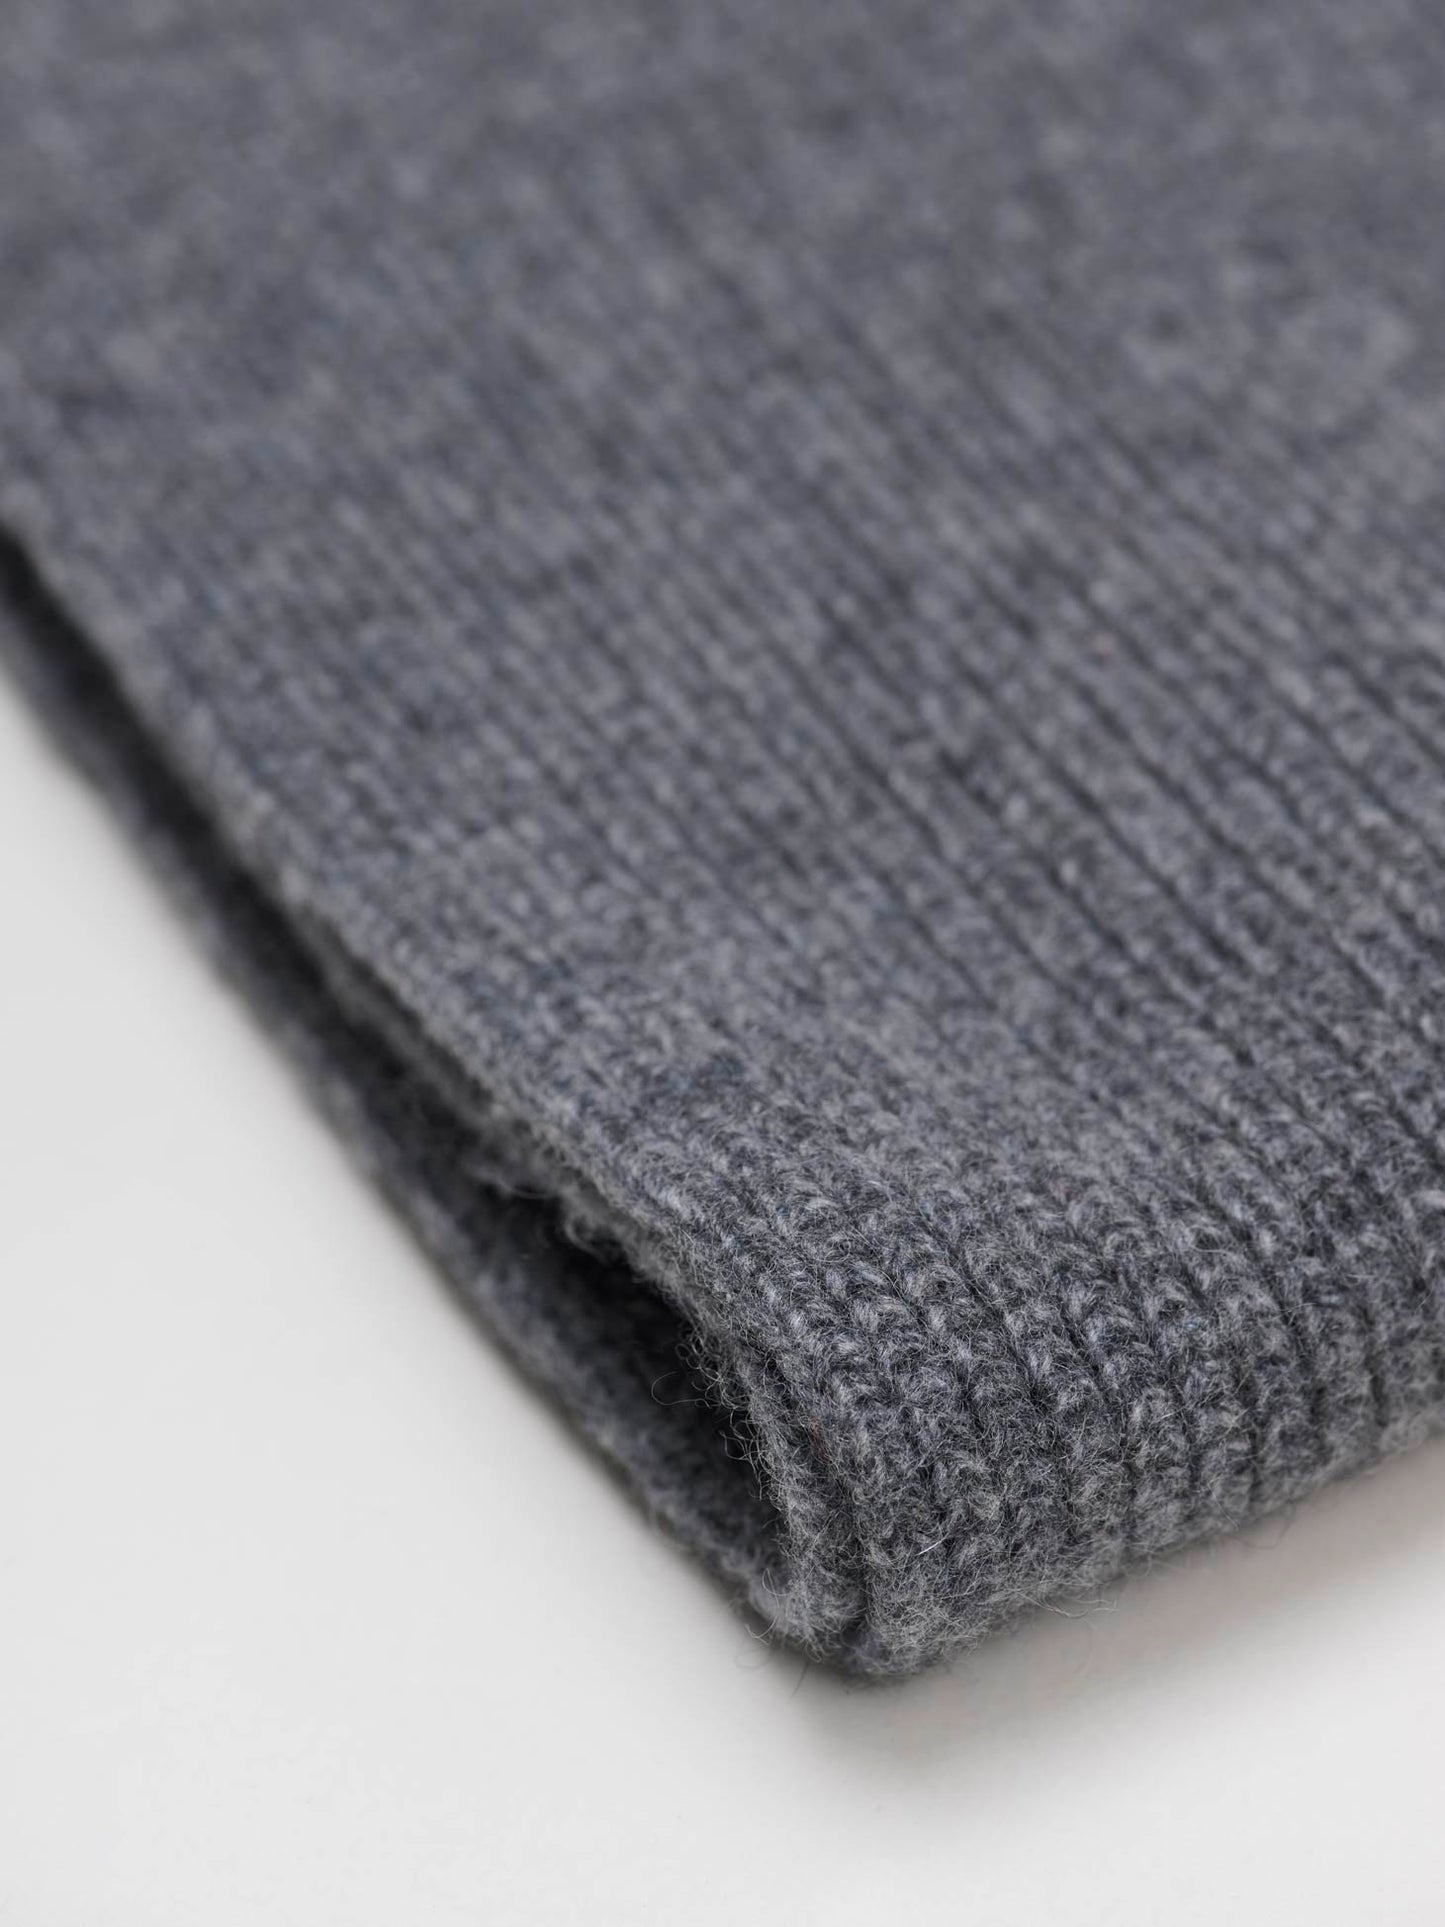 Recycled Cashmere Ribbed Scarf, Grey Melange